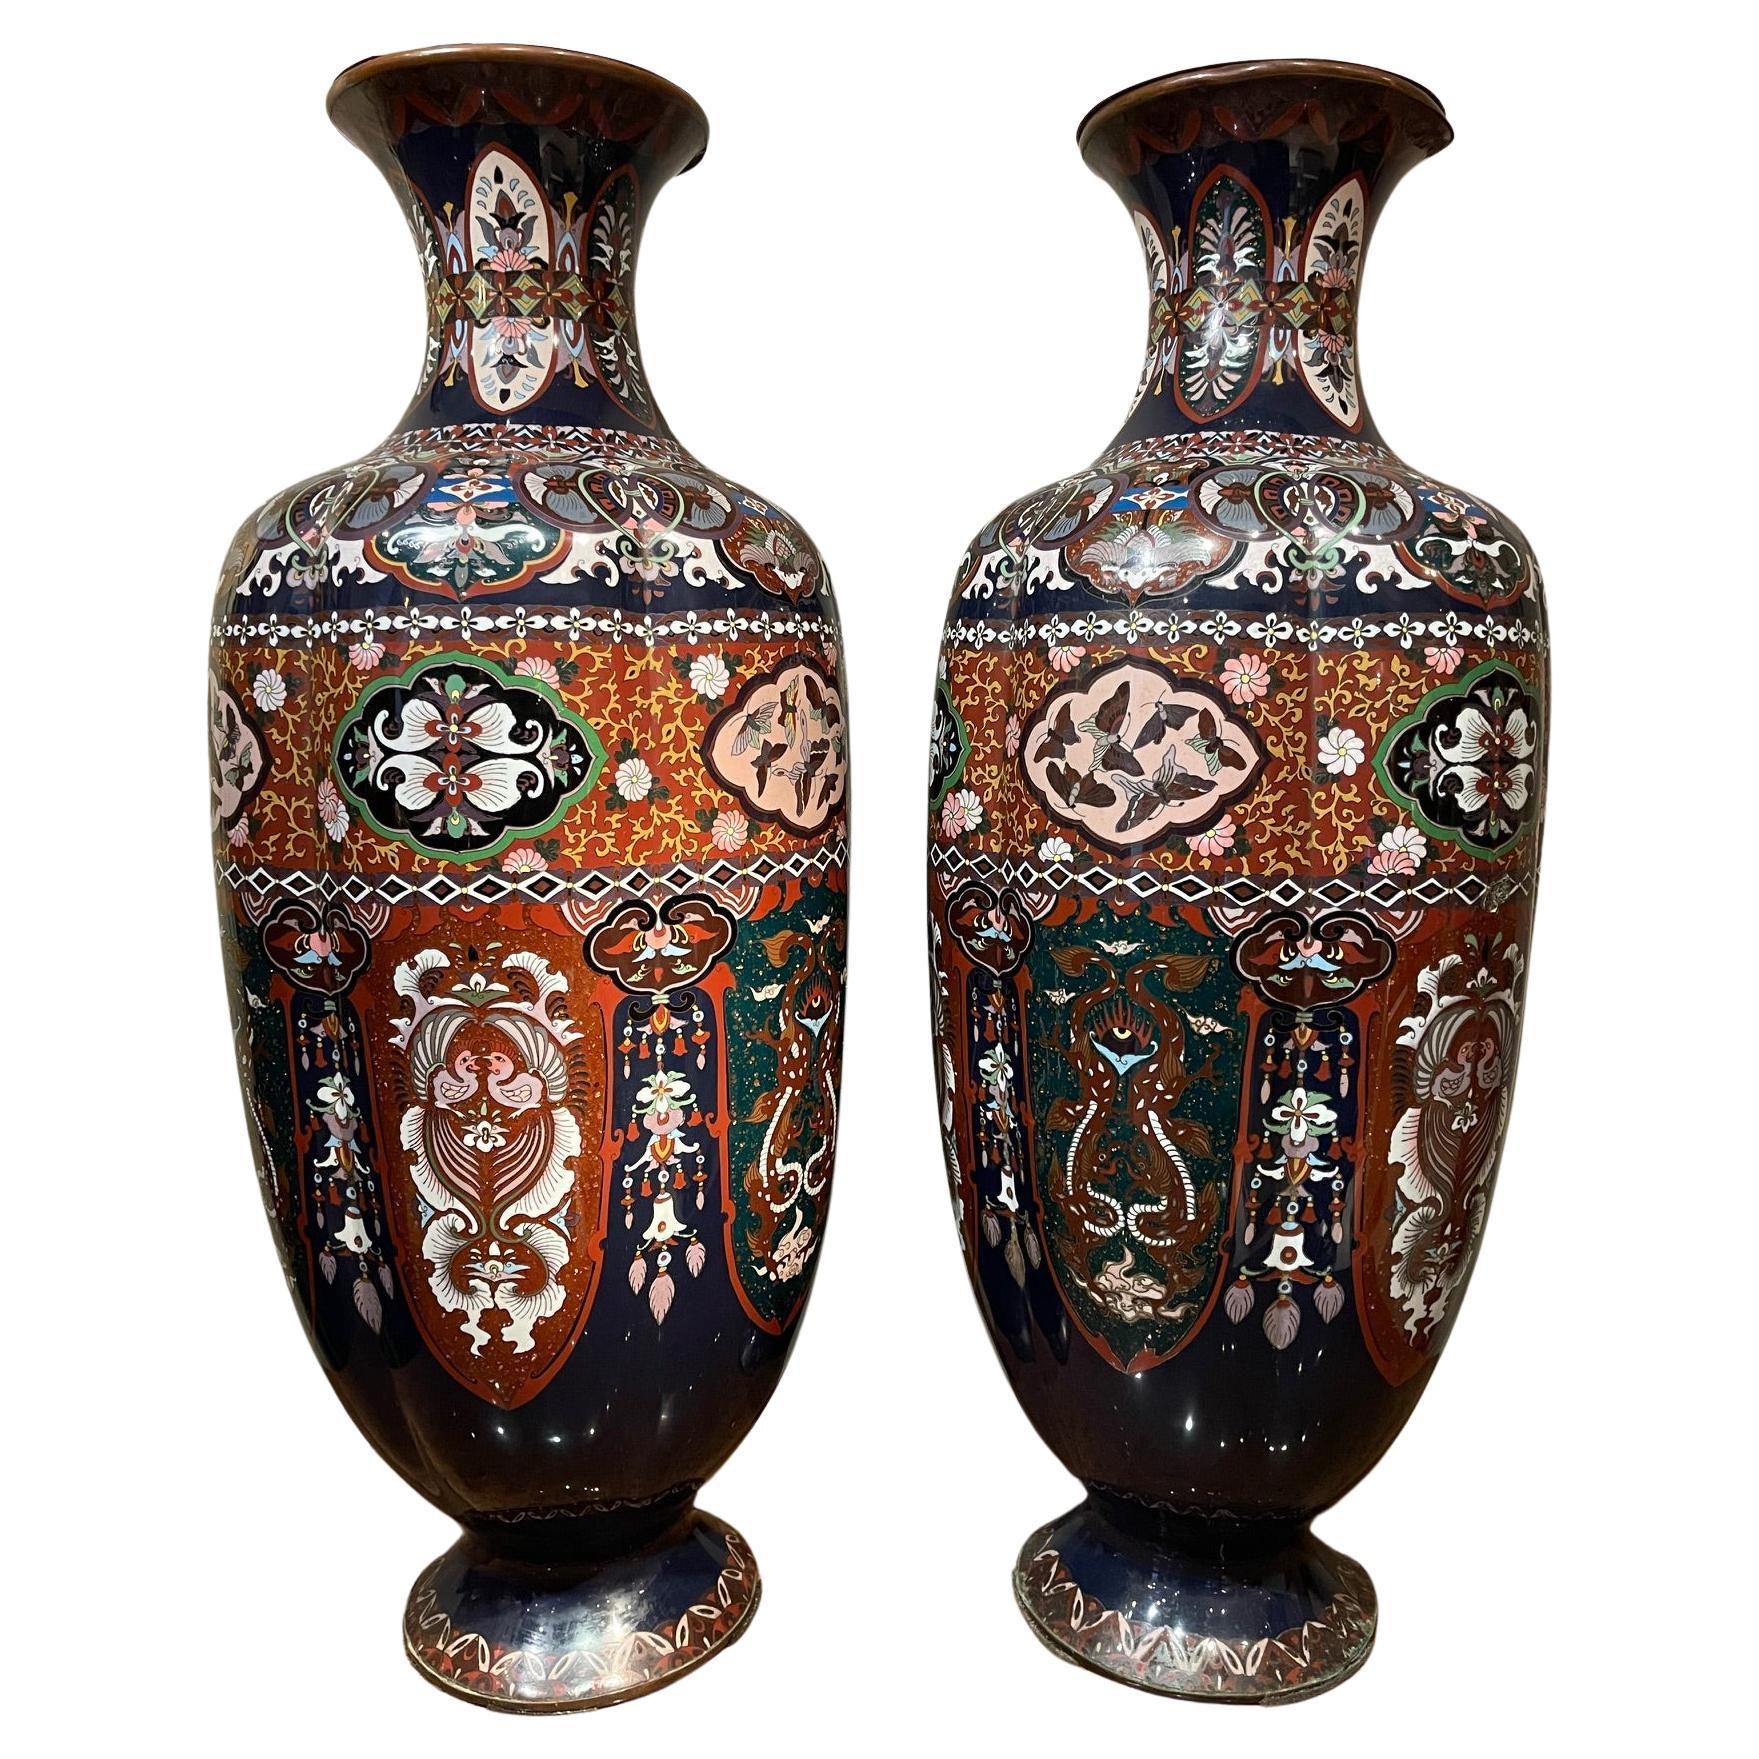 Very large pair of cloisonné vases, Japan 19th century